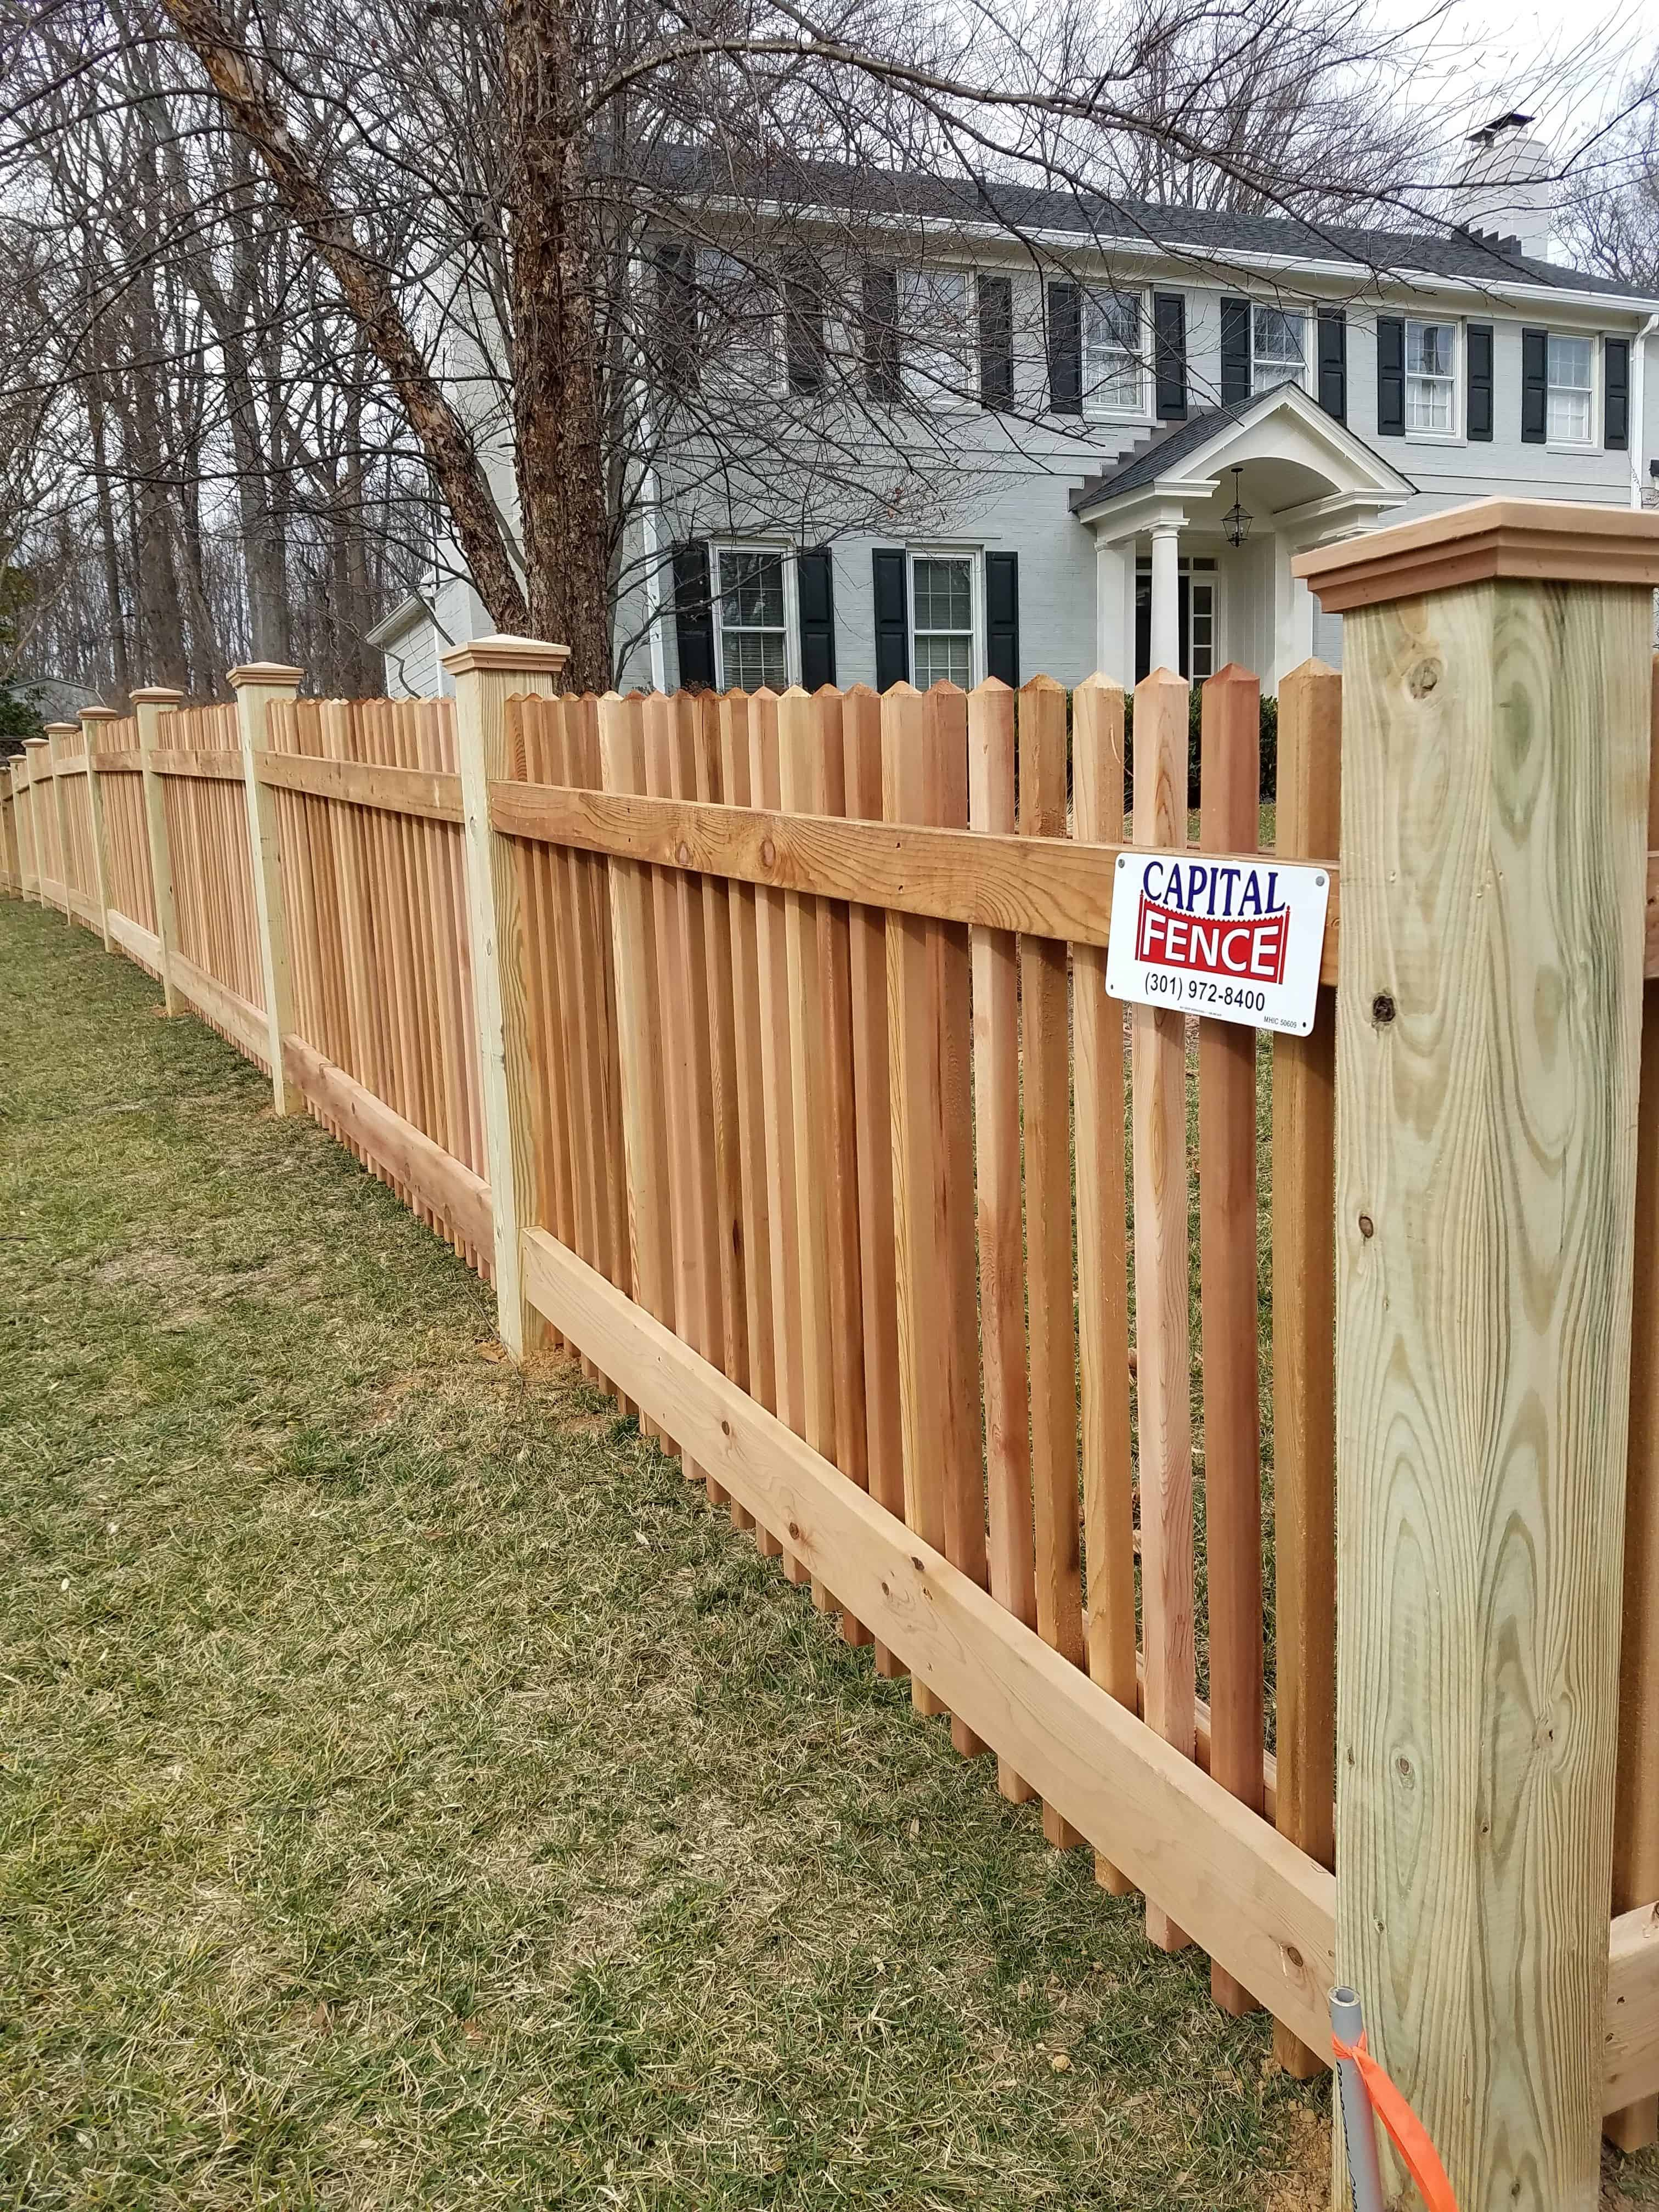 17.SIMPHOME.COM poolesville picket wood fence wood picket fence in 2019 2099